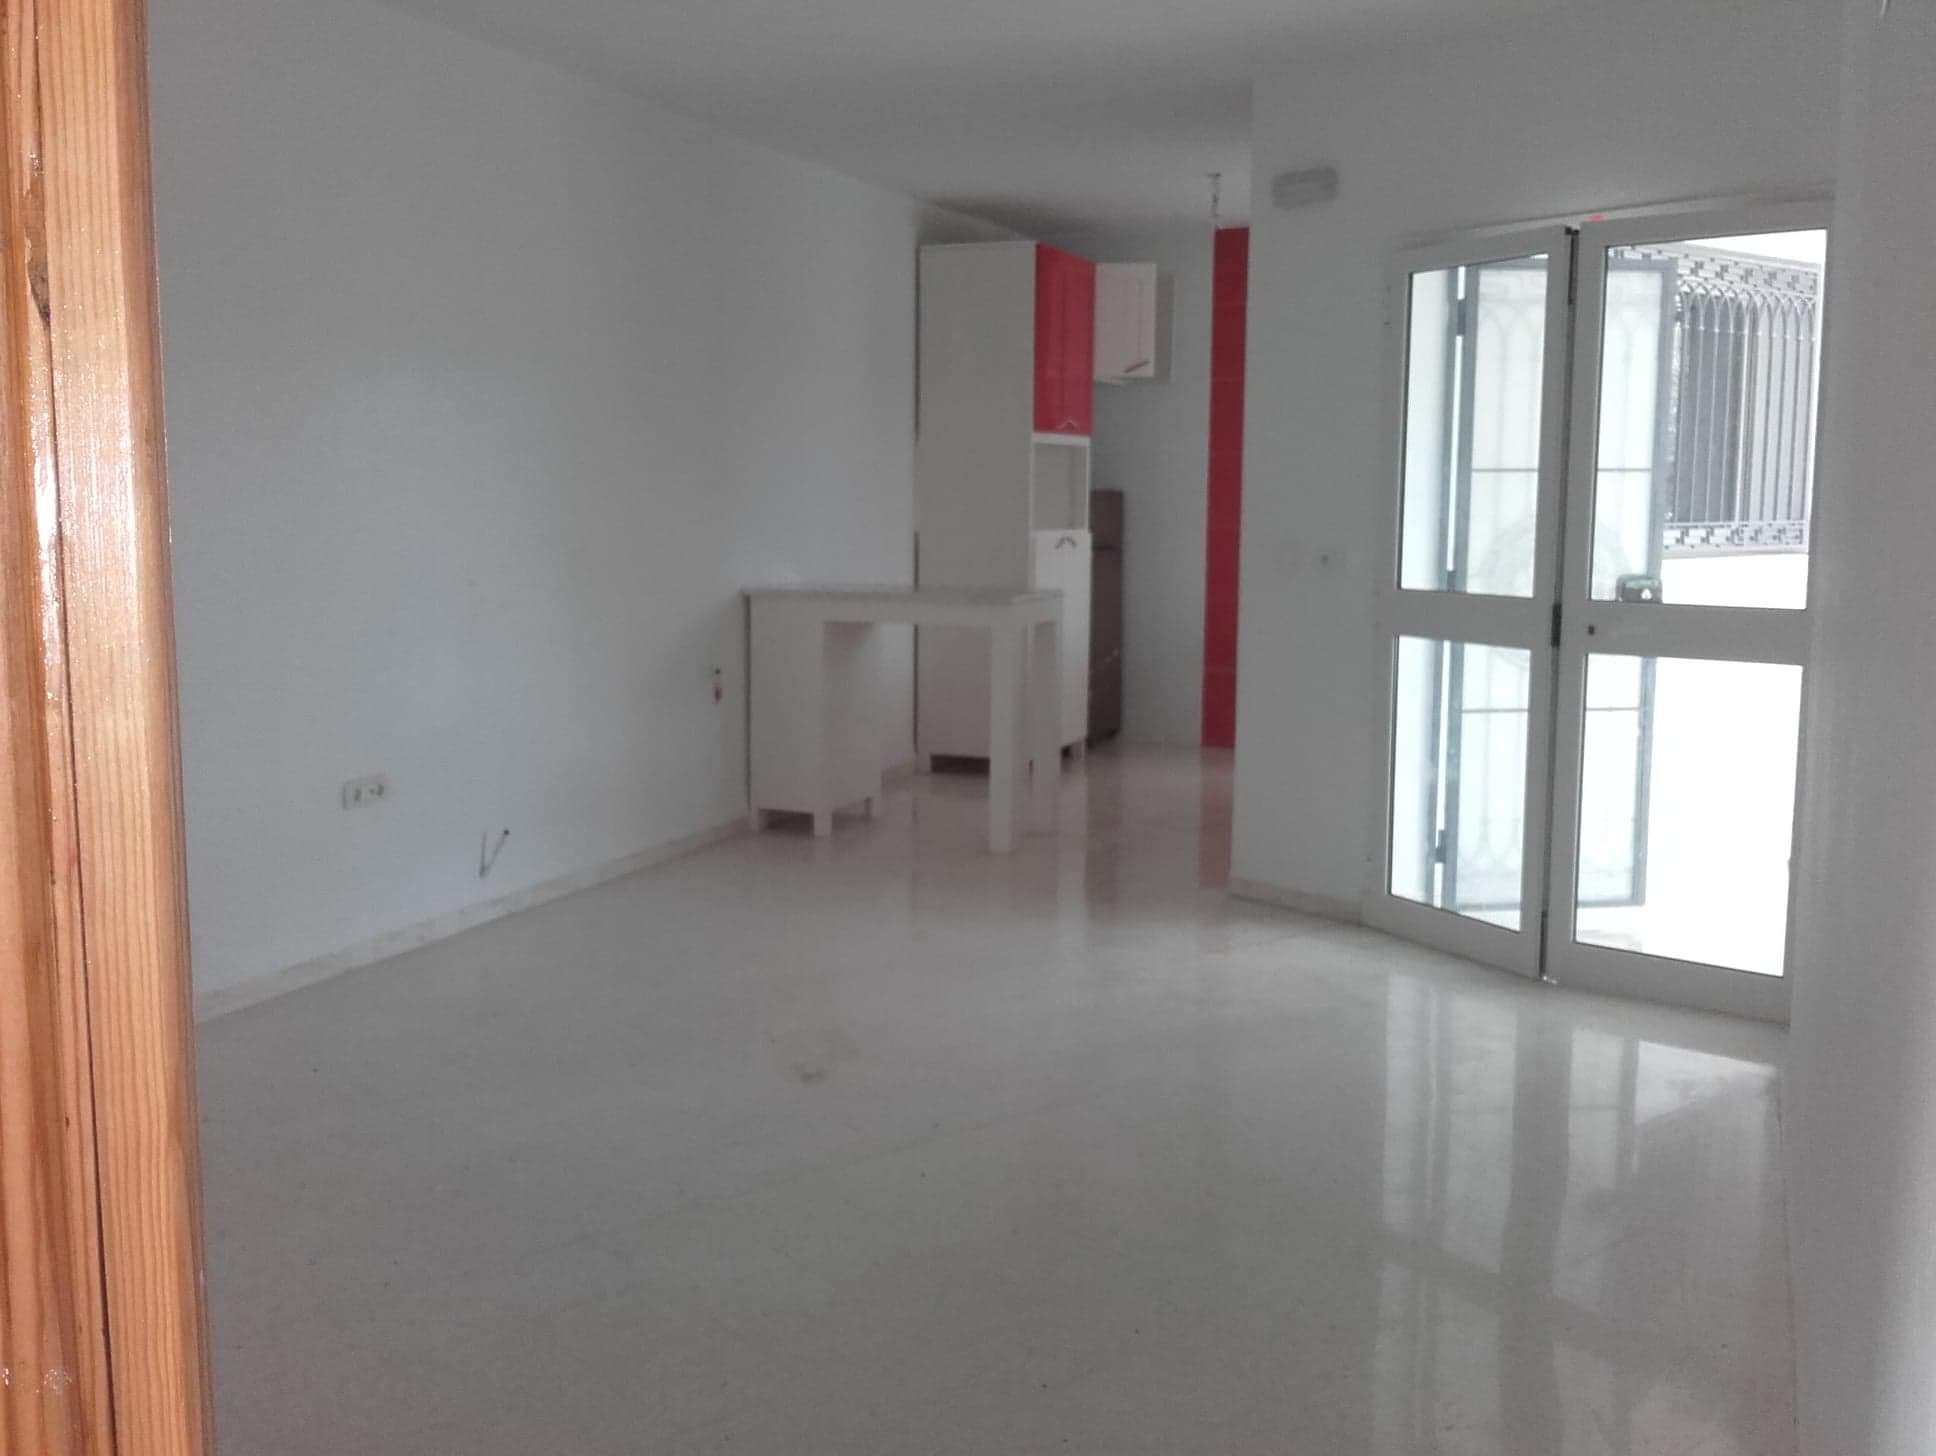 Akouda Tantana Location Appart. 2 pices Appartement hs